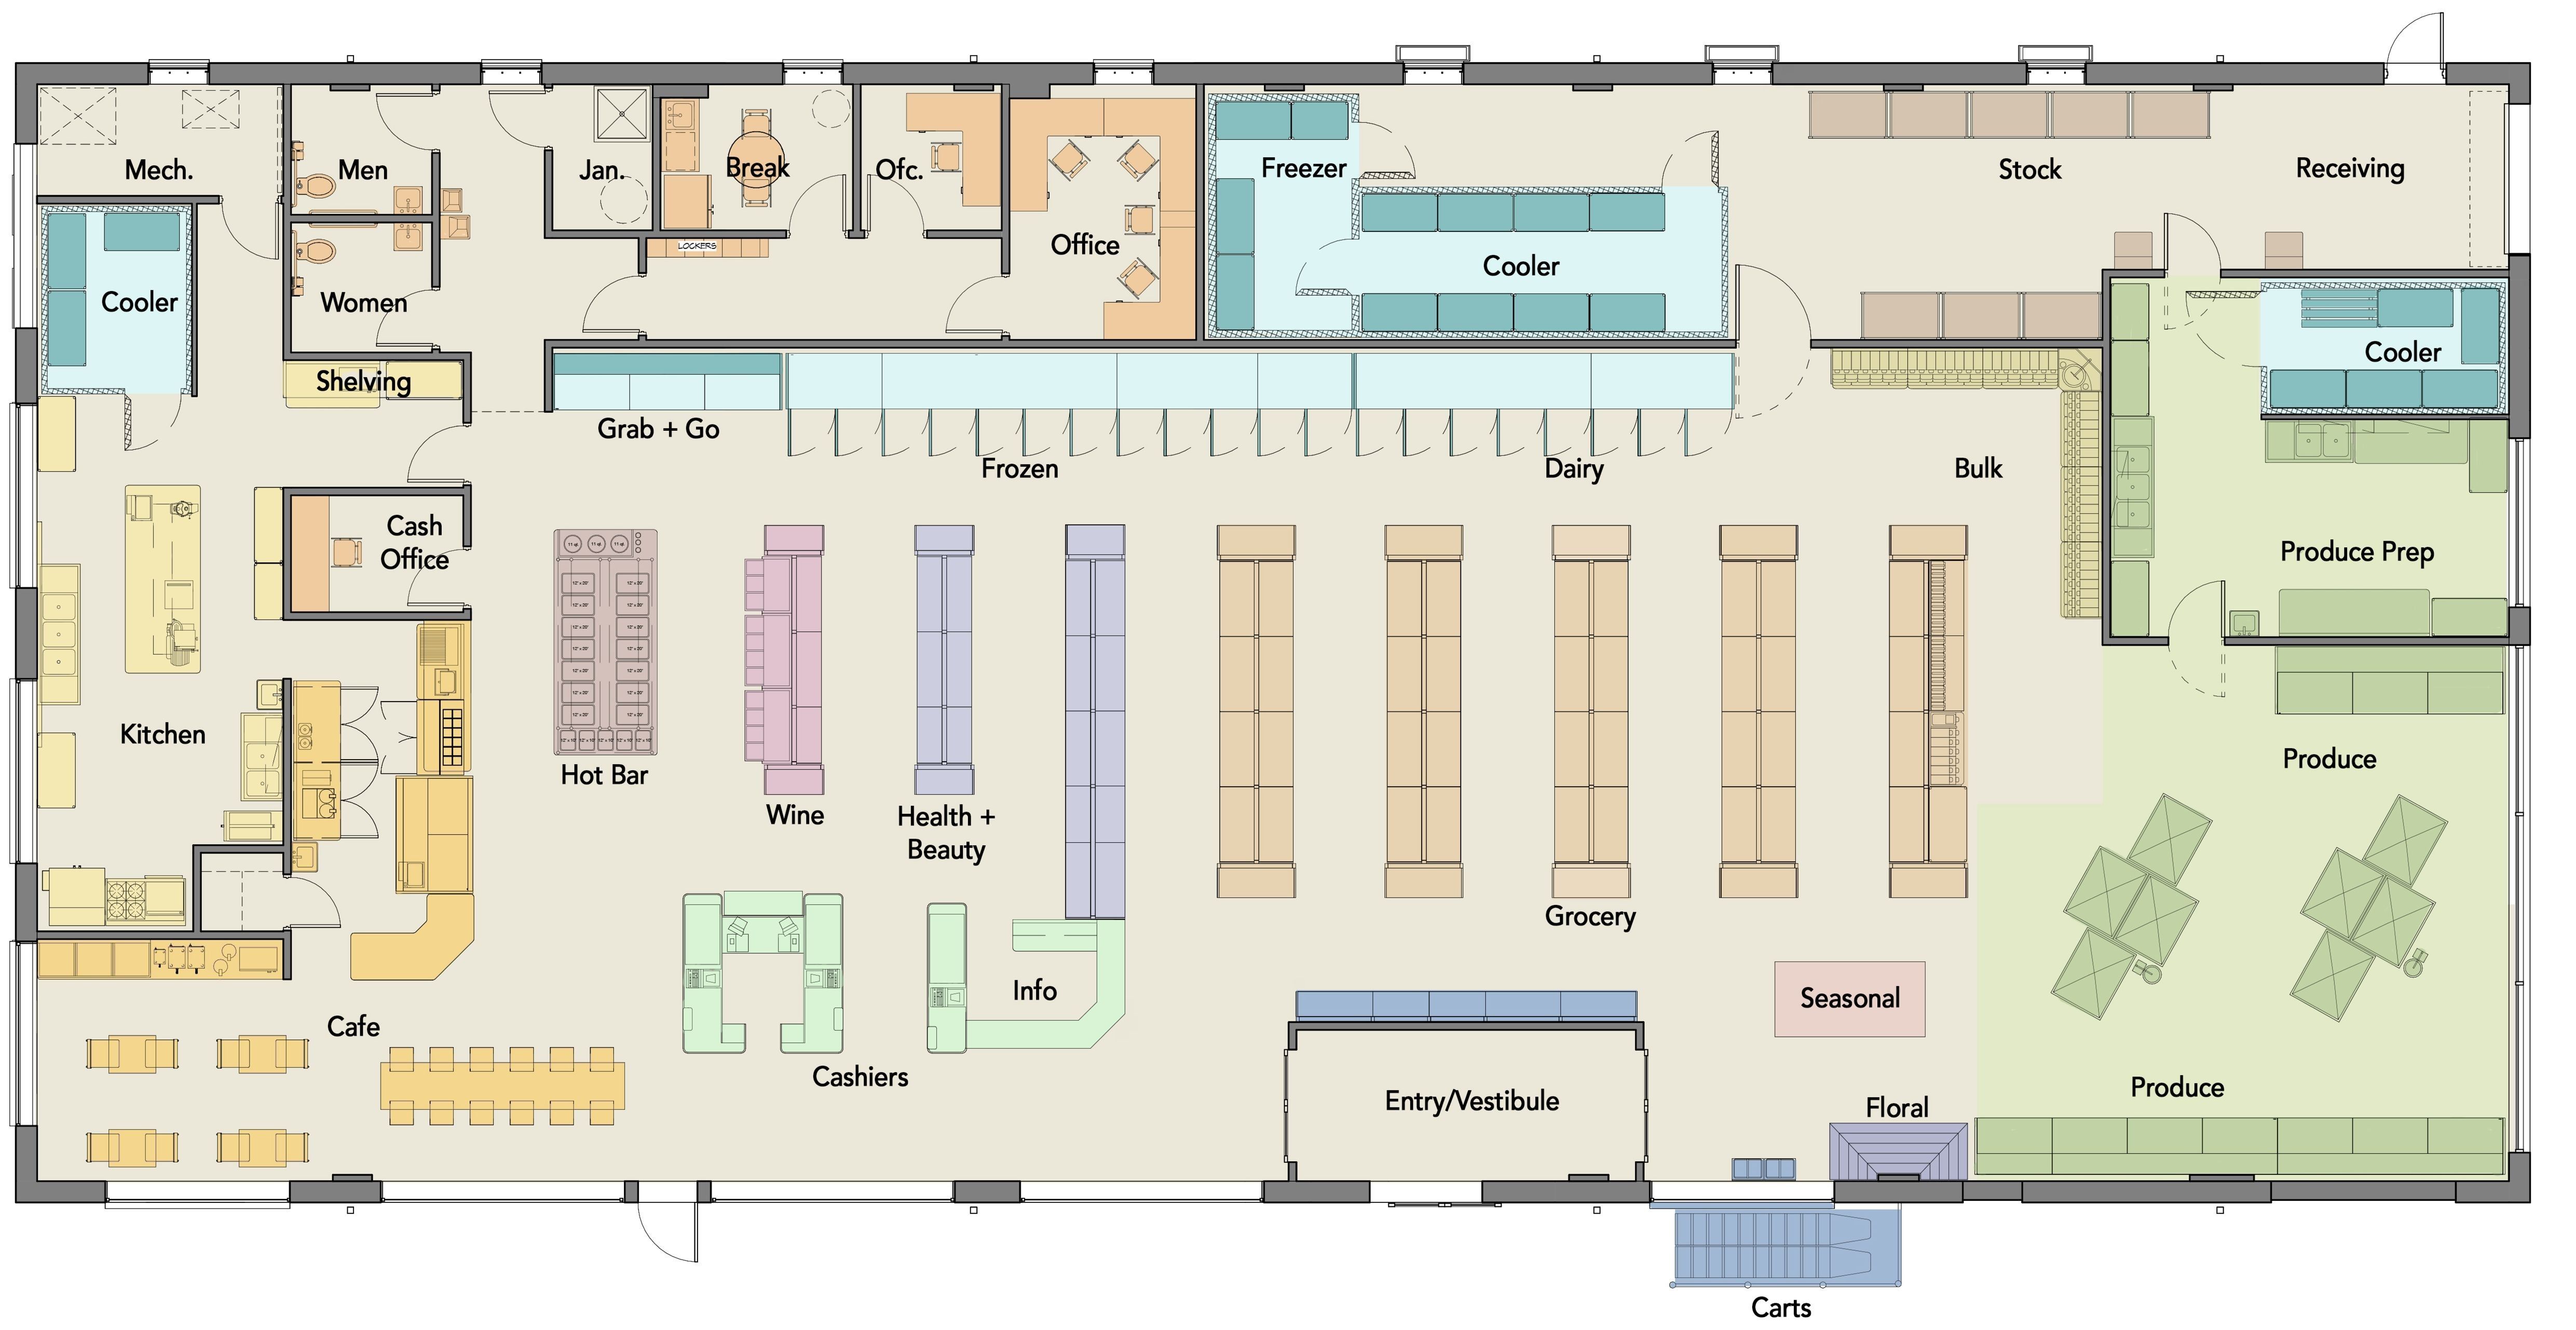 Grocery Store Floor Plan Inspirational Layout Of A